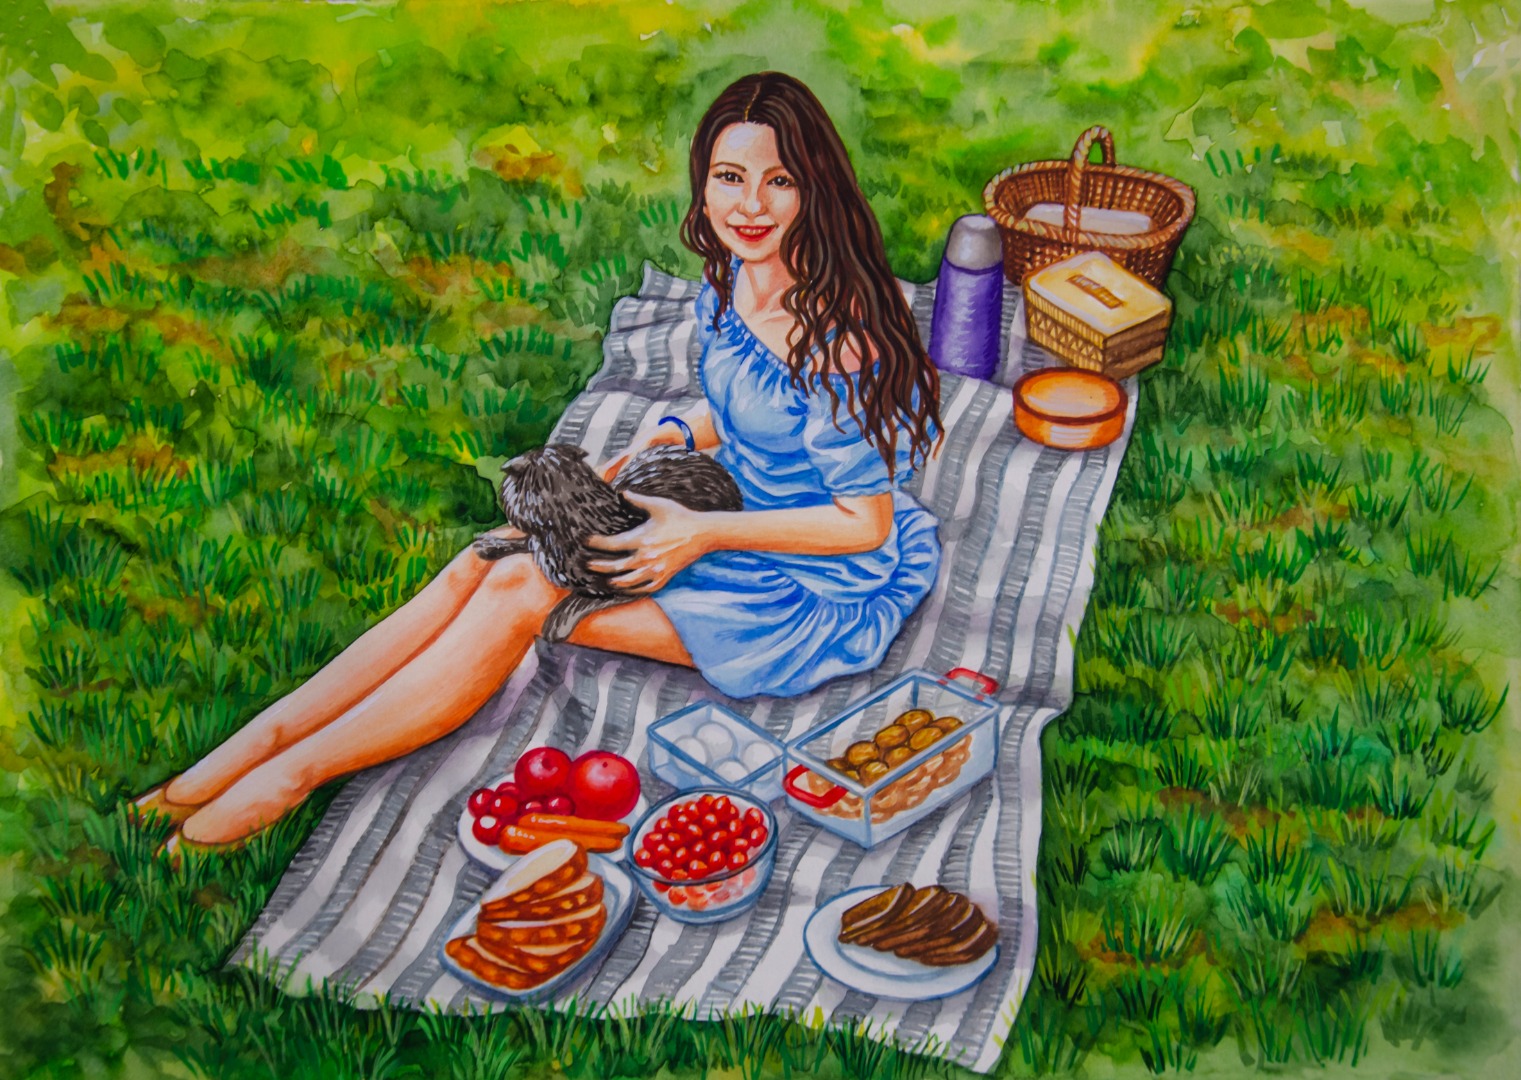 Watercolor painting - a girl on a picnic is sitting on a plaid on the grass, next to her is food.jpg